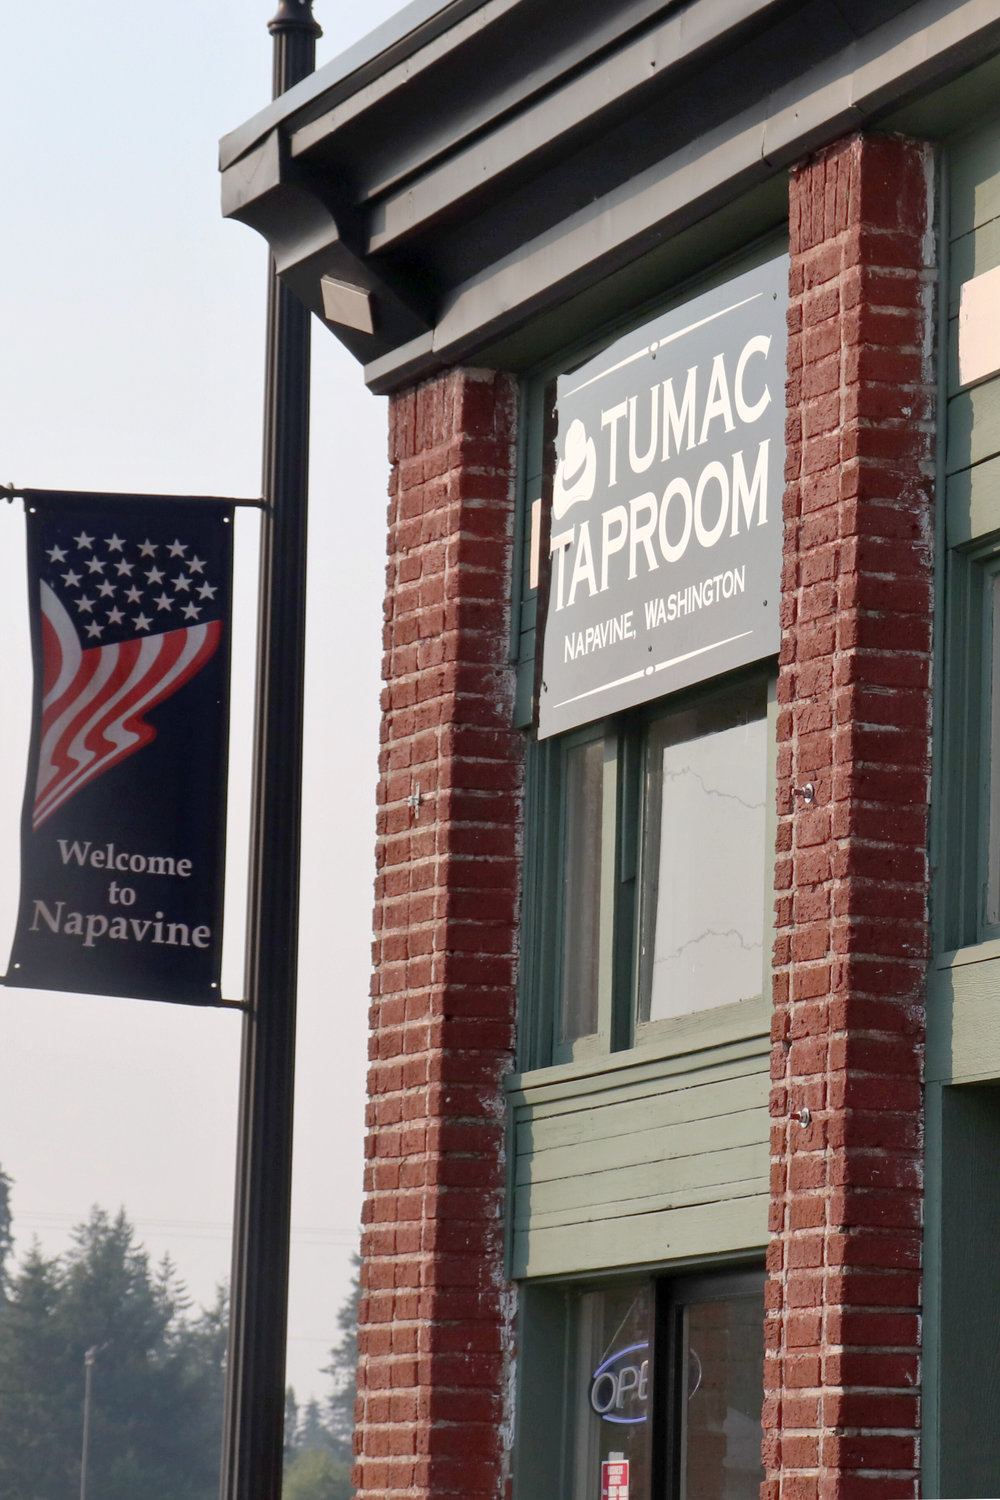 Tumac Taproom is located in a historic building at 108 E. Washington Street in Napavine.